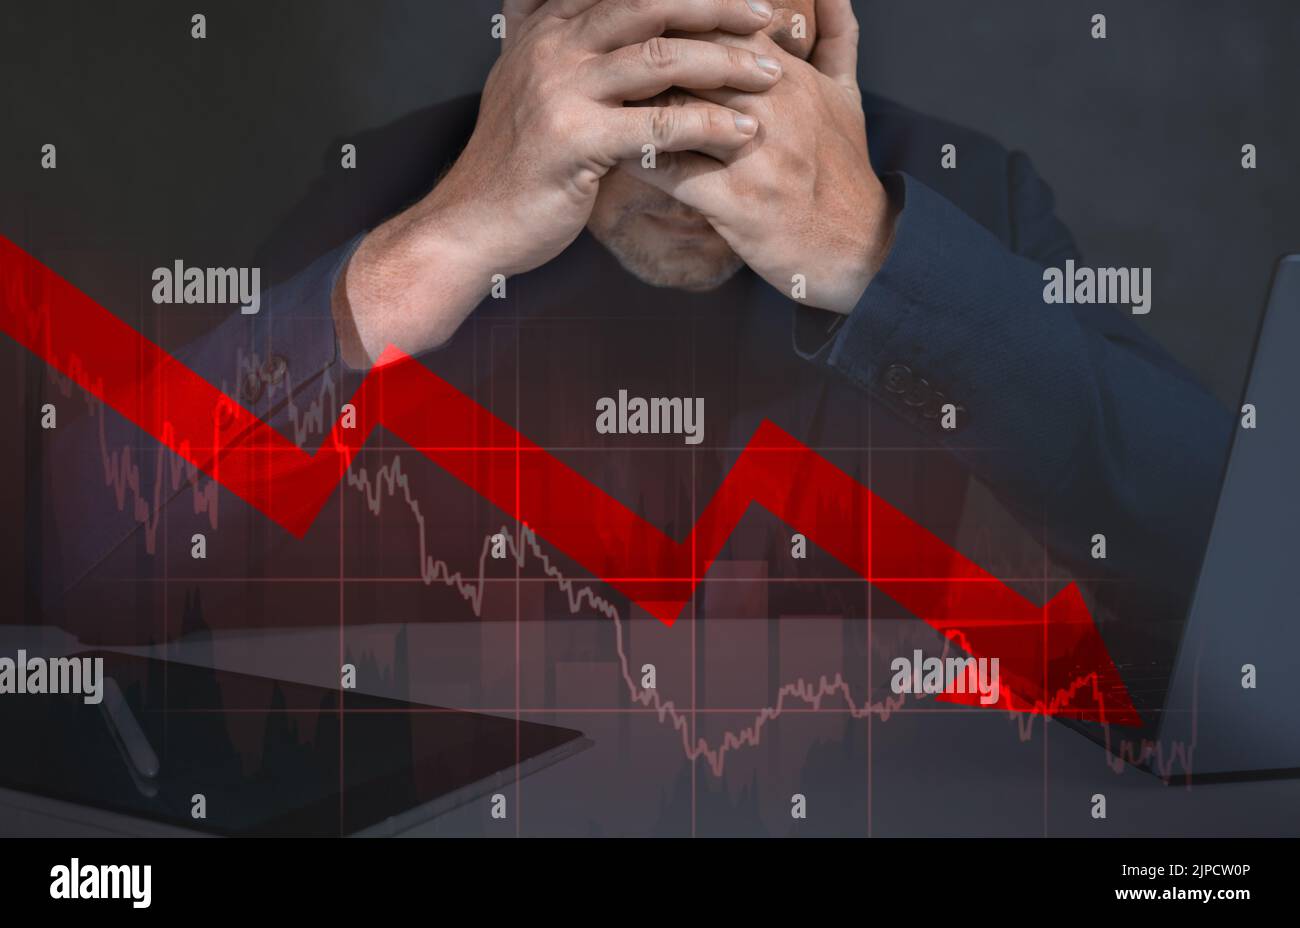 Depressed business man looking down at falling red arrow. Stressed business man crypto trader broker investor analyzing stock exchange market crypto t Stock Photo